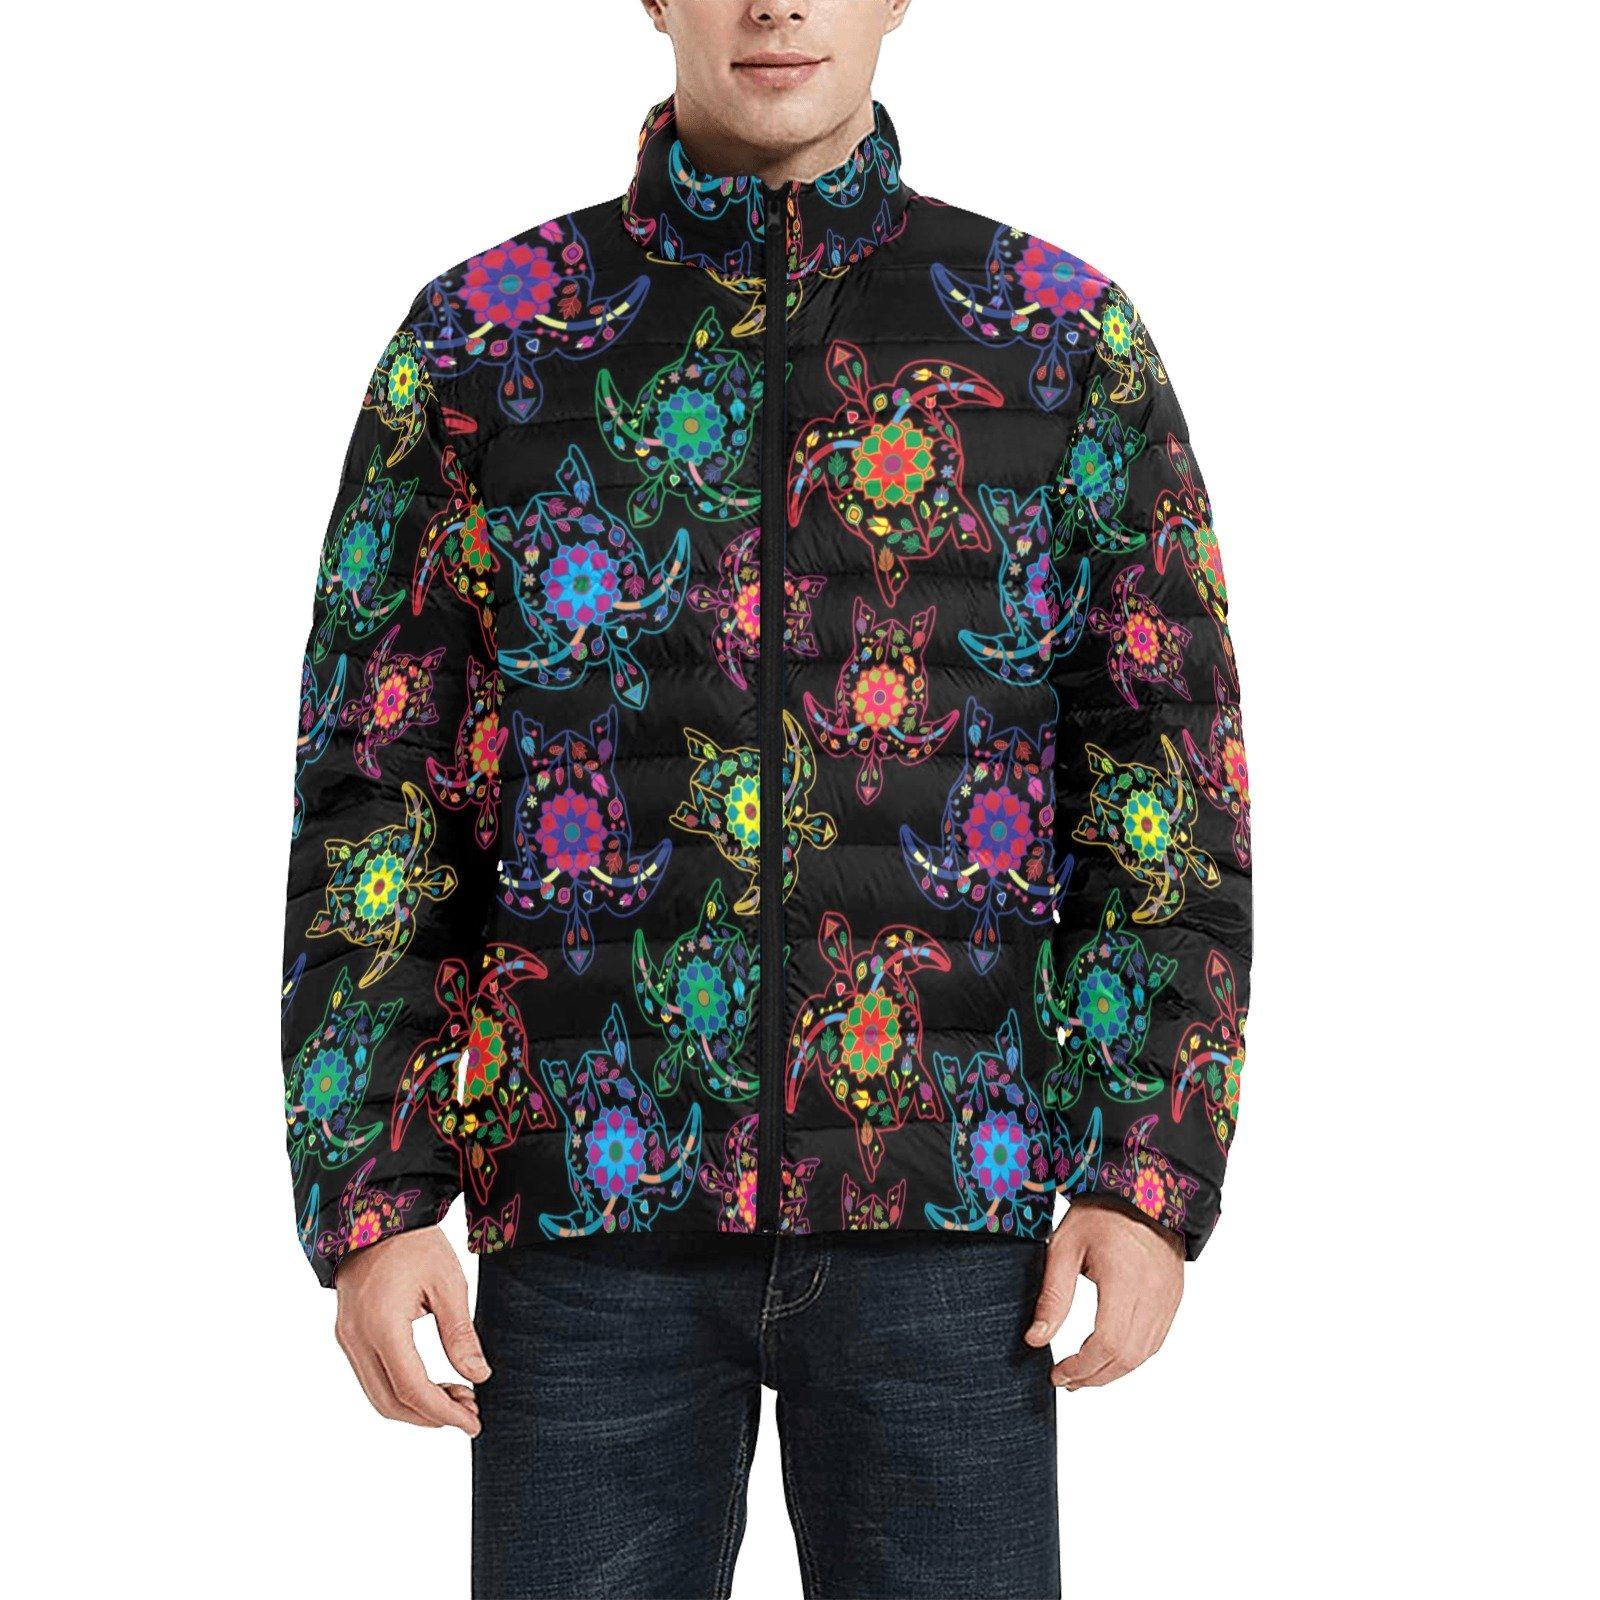 Floral Turtle Men's Stand Collar Padded Jacket (Model H41) Men's Stand Collar Padded Jacket (H41) e-joyer 